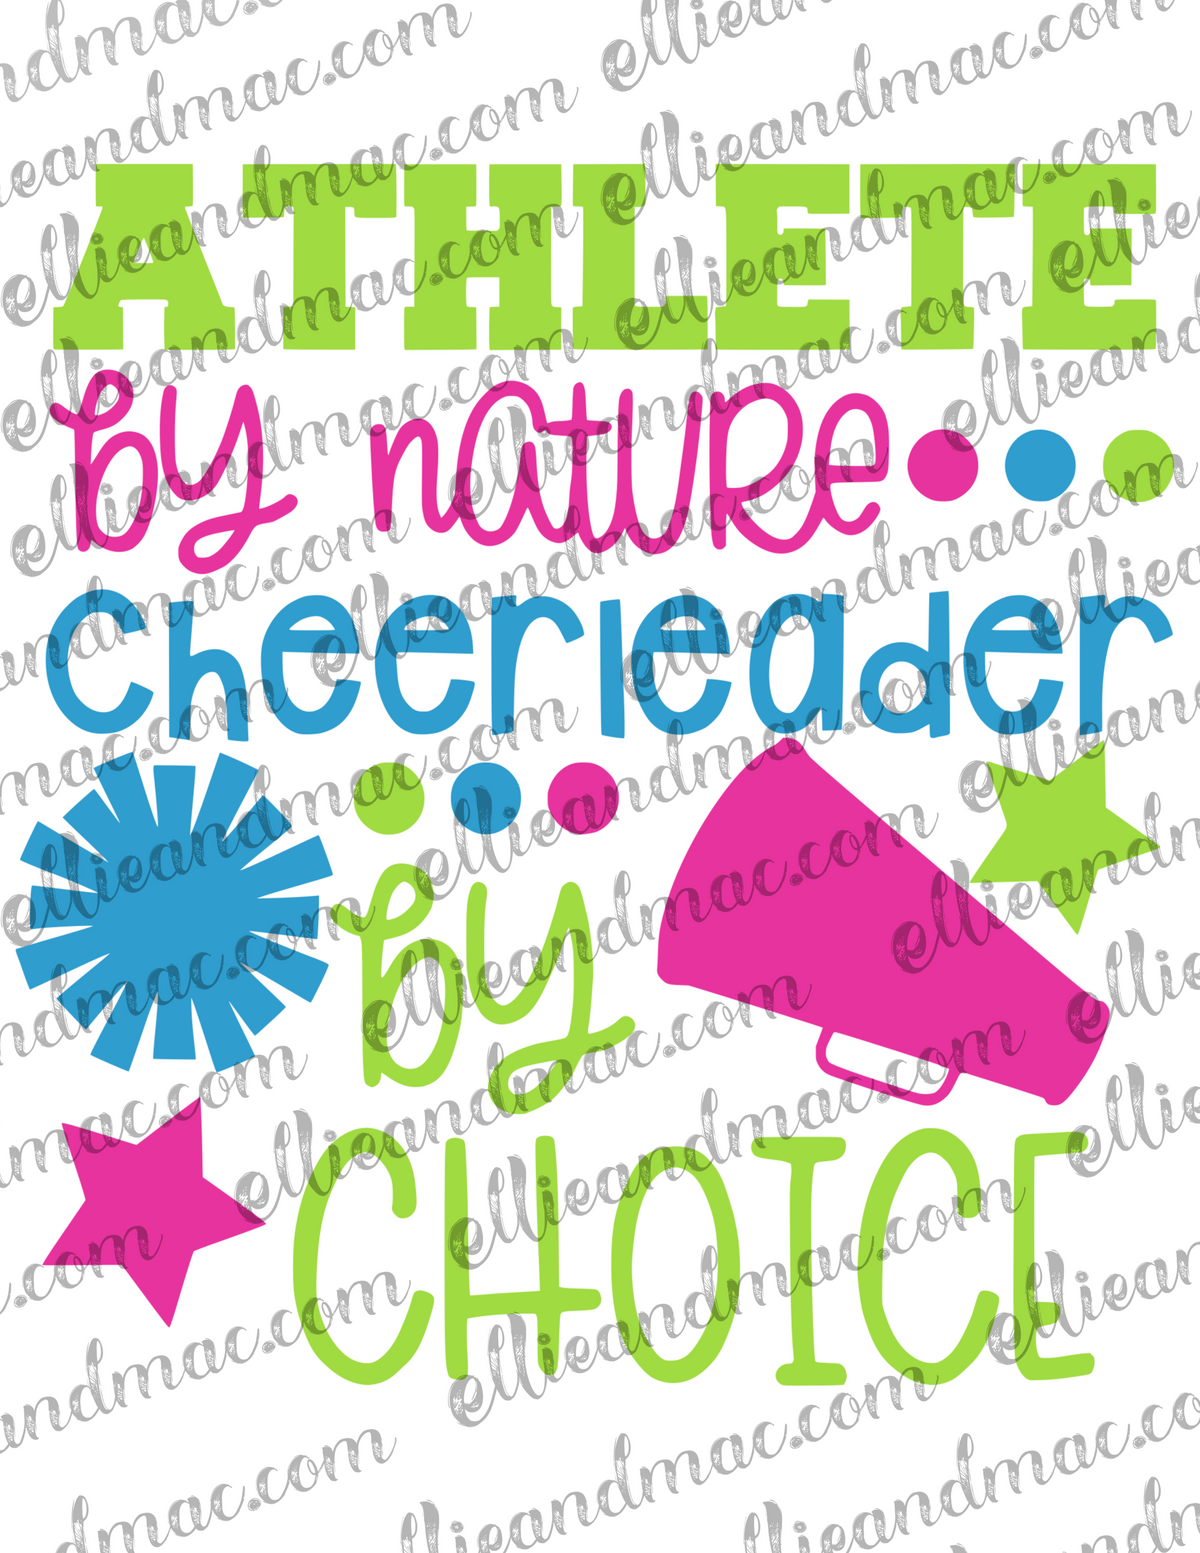 Athlete By Nature Cheerleader By Choice SVG Cutting File